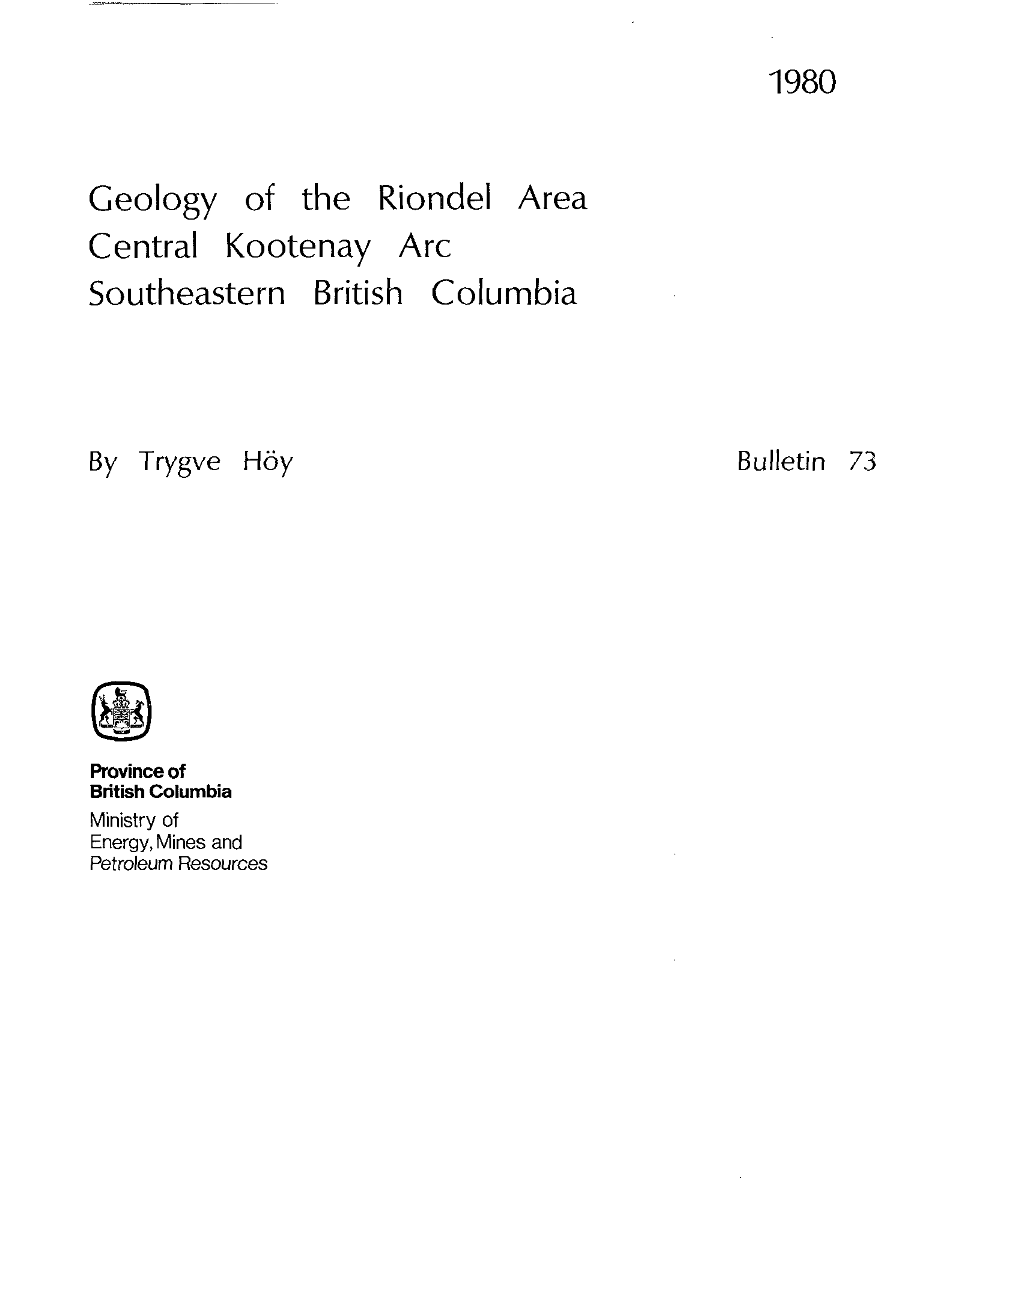 Geology of the Riondel Area Central Kootenay Arc Southeastern